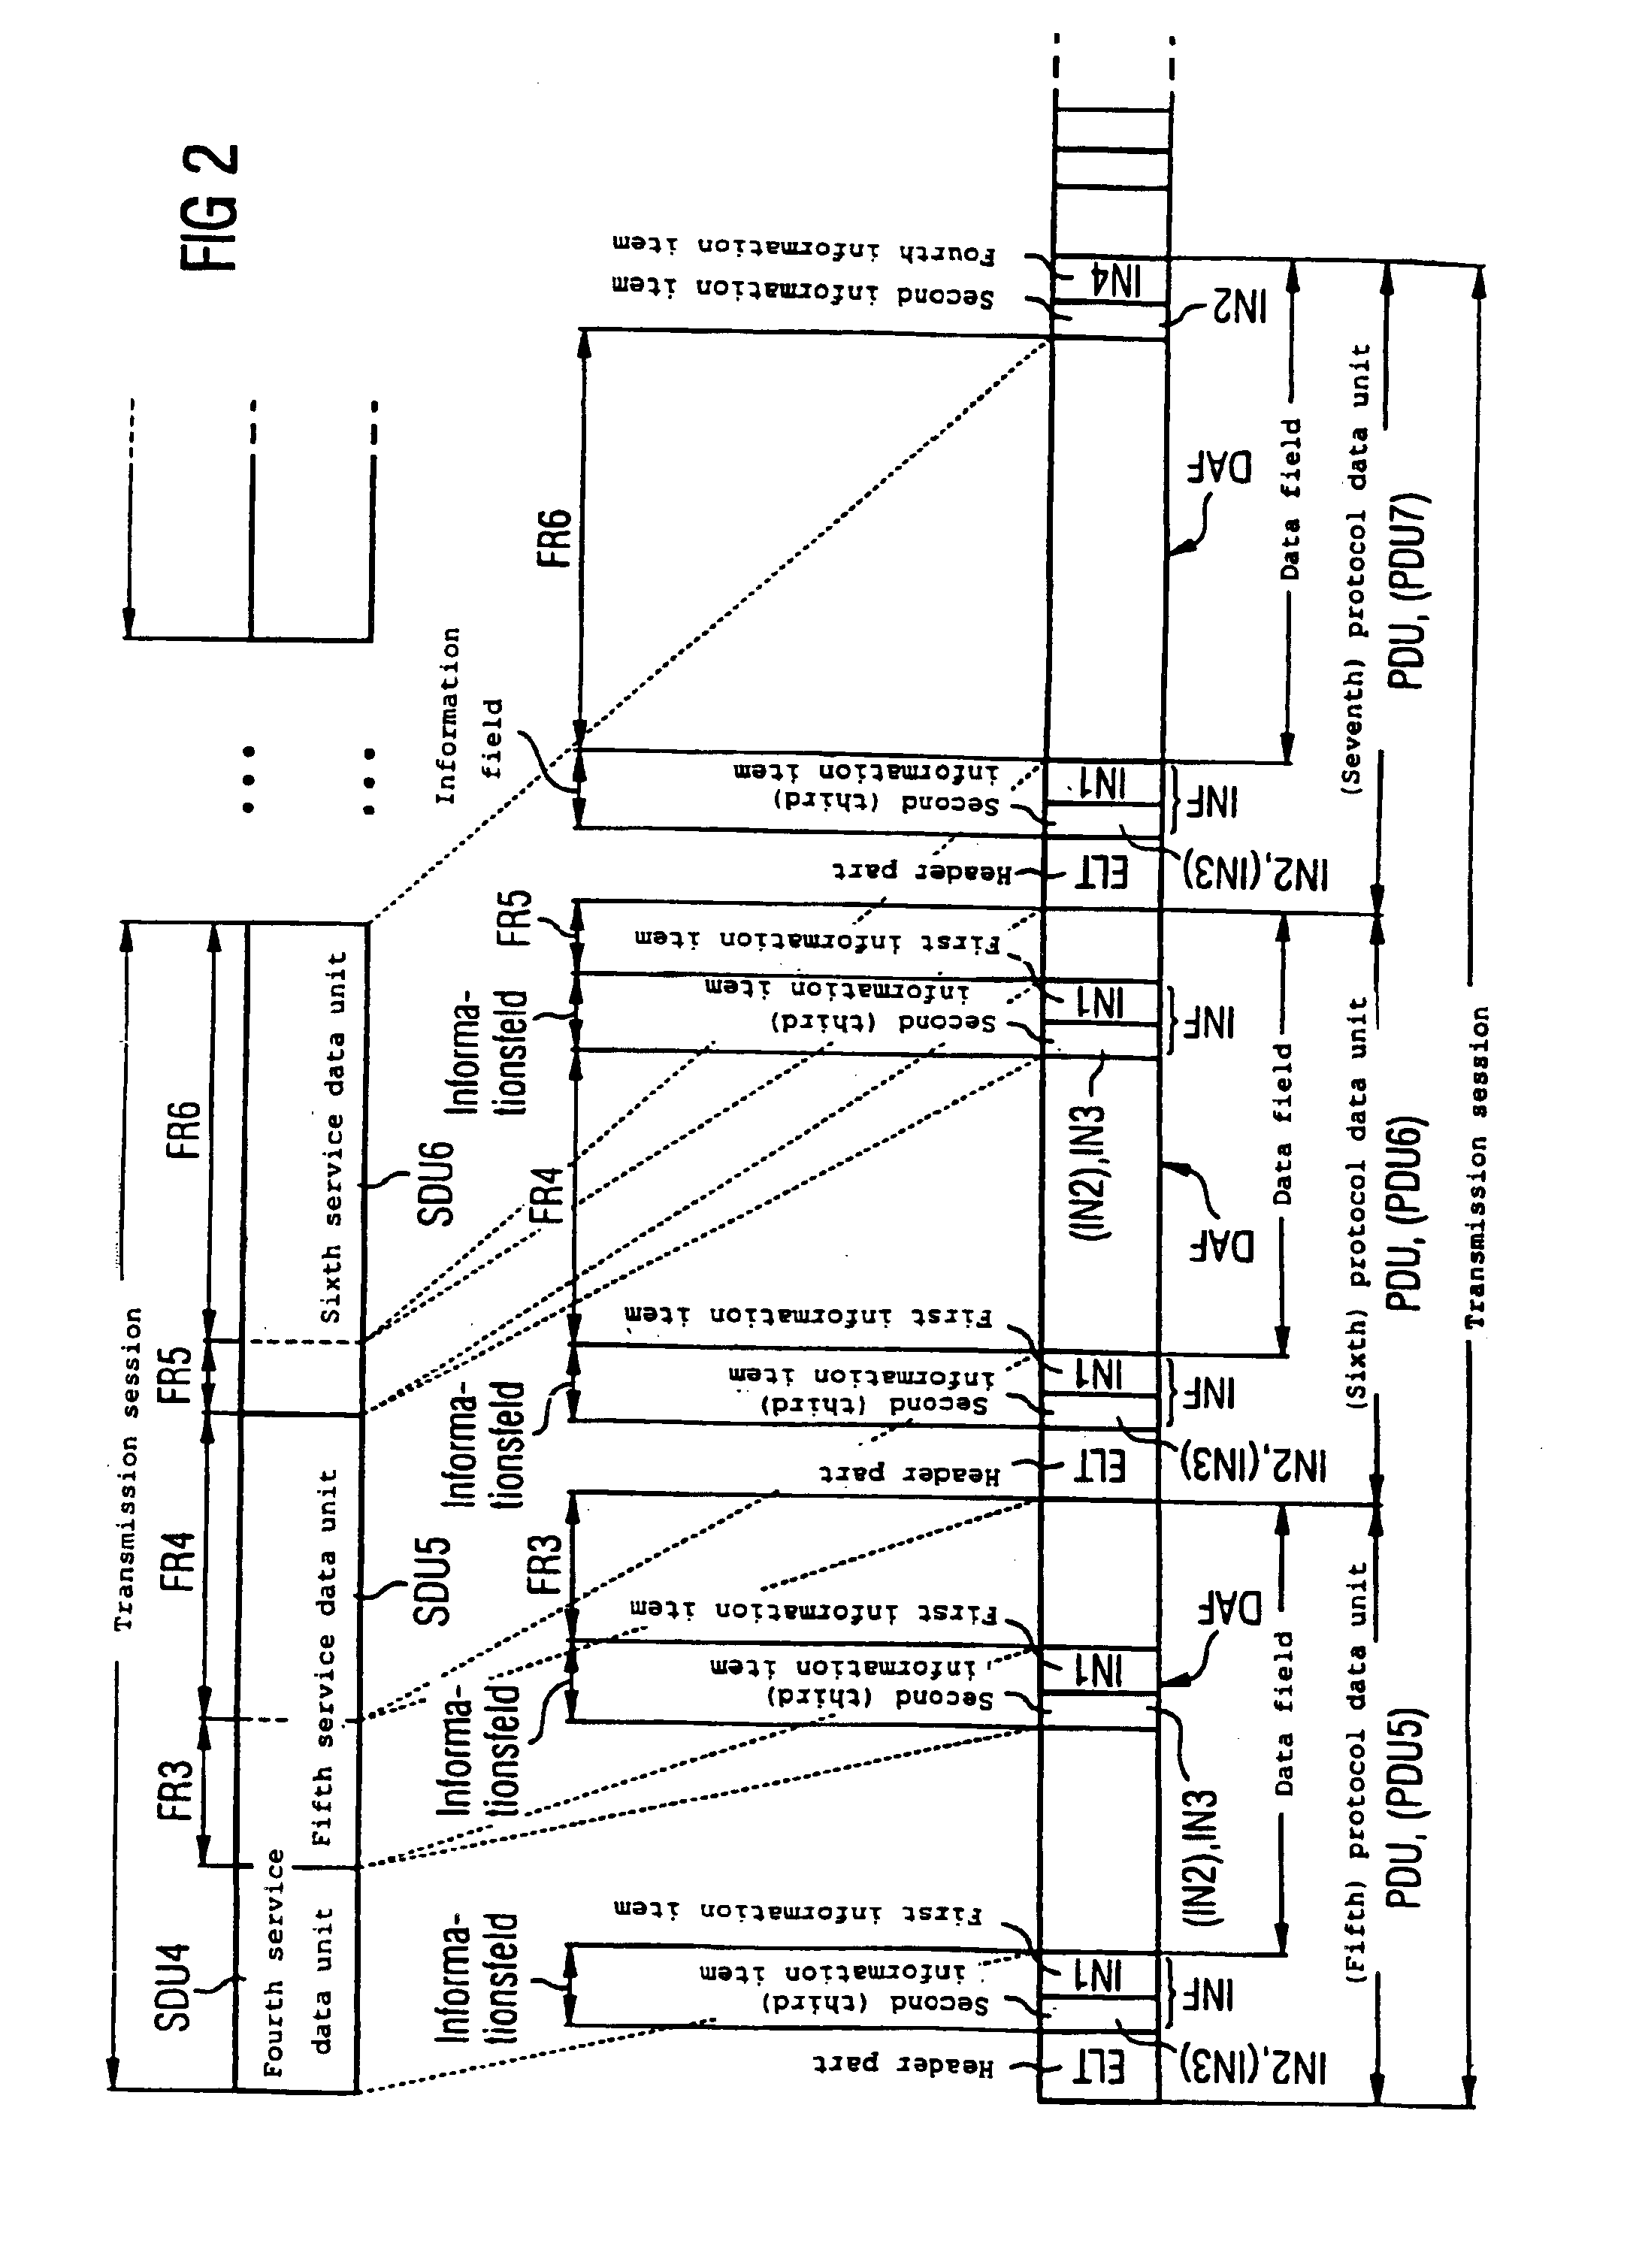 Method for transmitting service data in telecommunication systems with wireless telecommunication based on a predefined radio interface protocol between telecommunication devices, especially voice data and/or packet data in dect systems